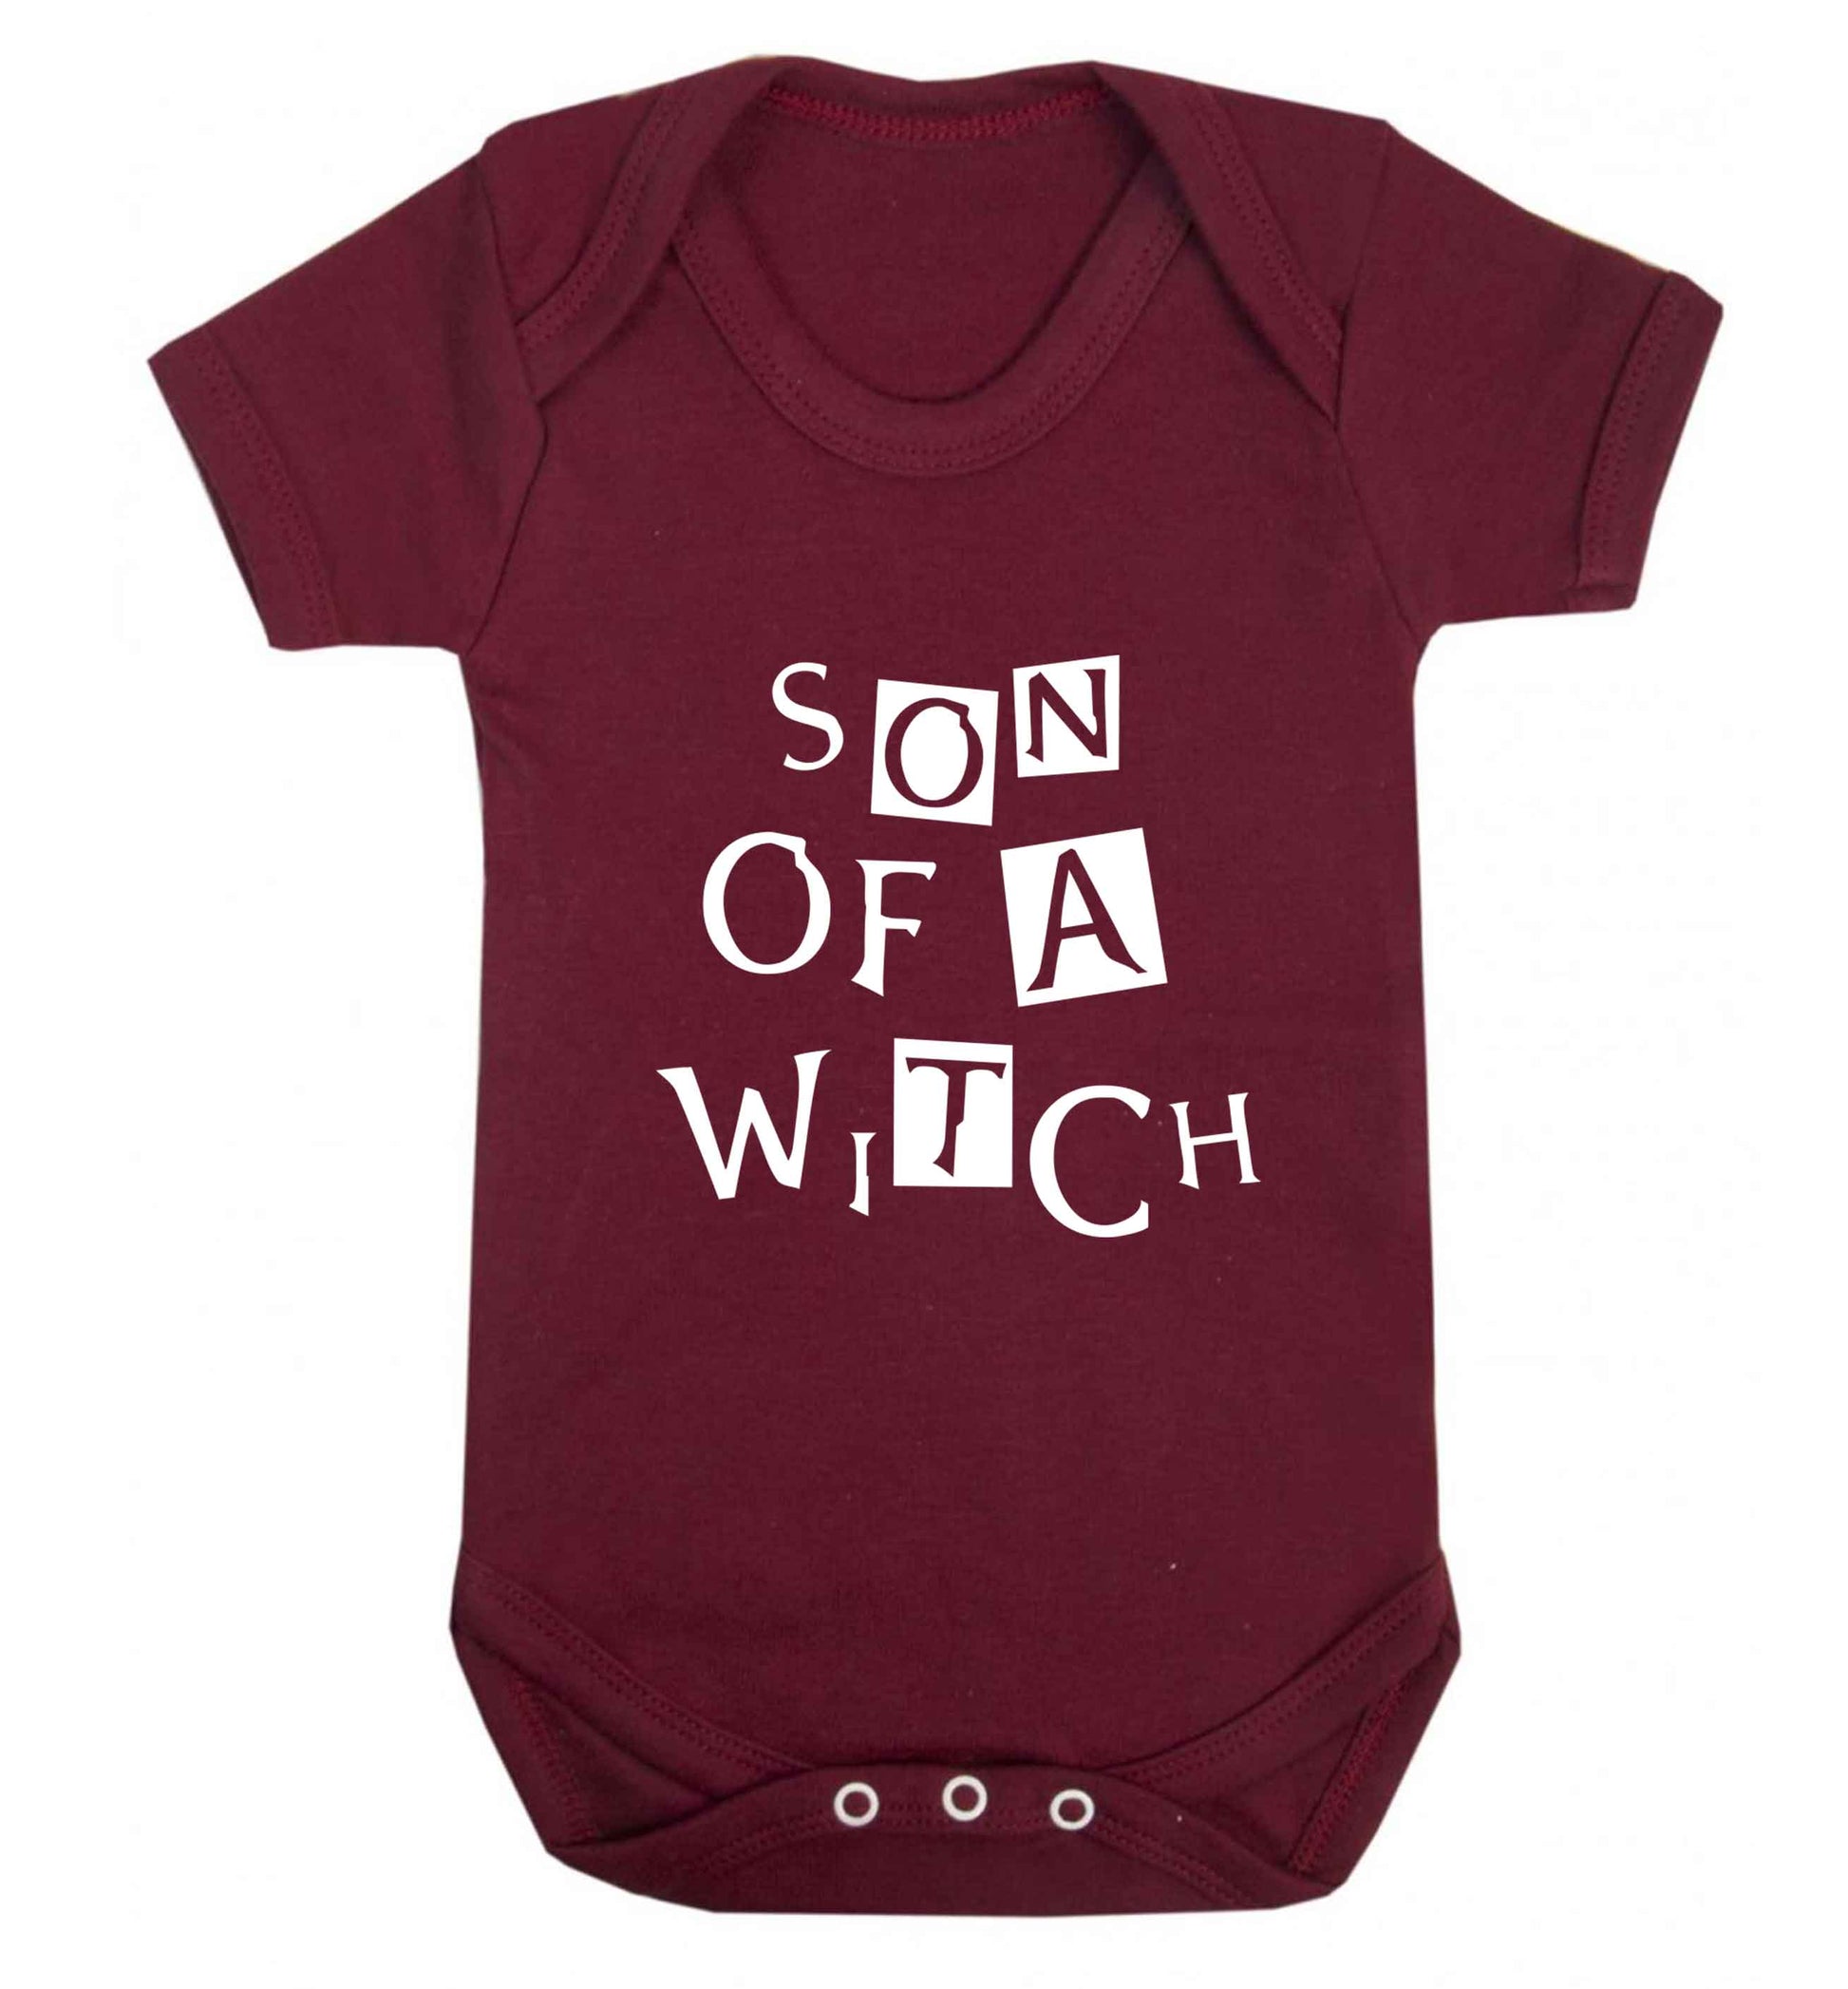 Son of a witch baby vest maroon 18-24 months